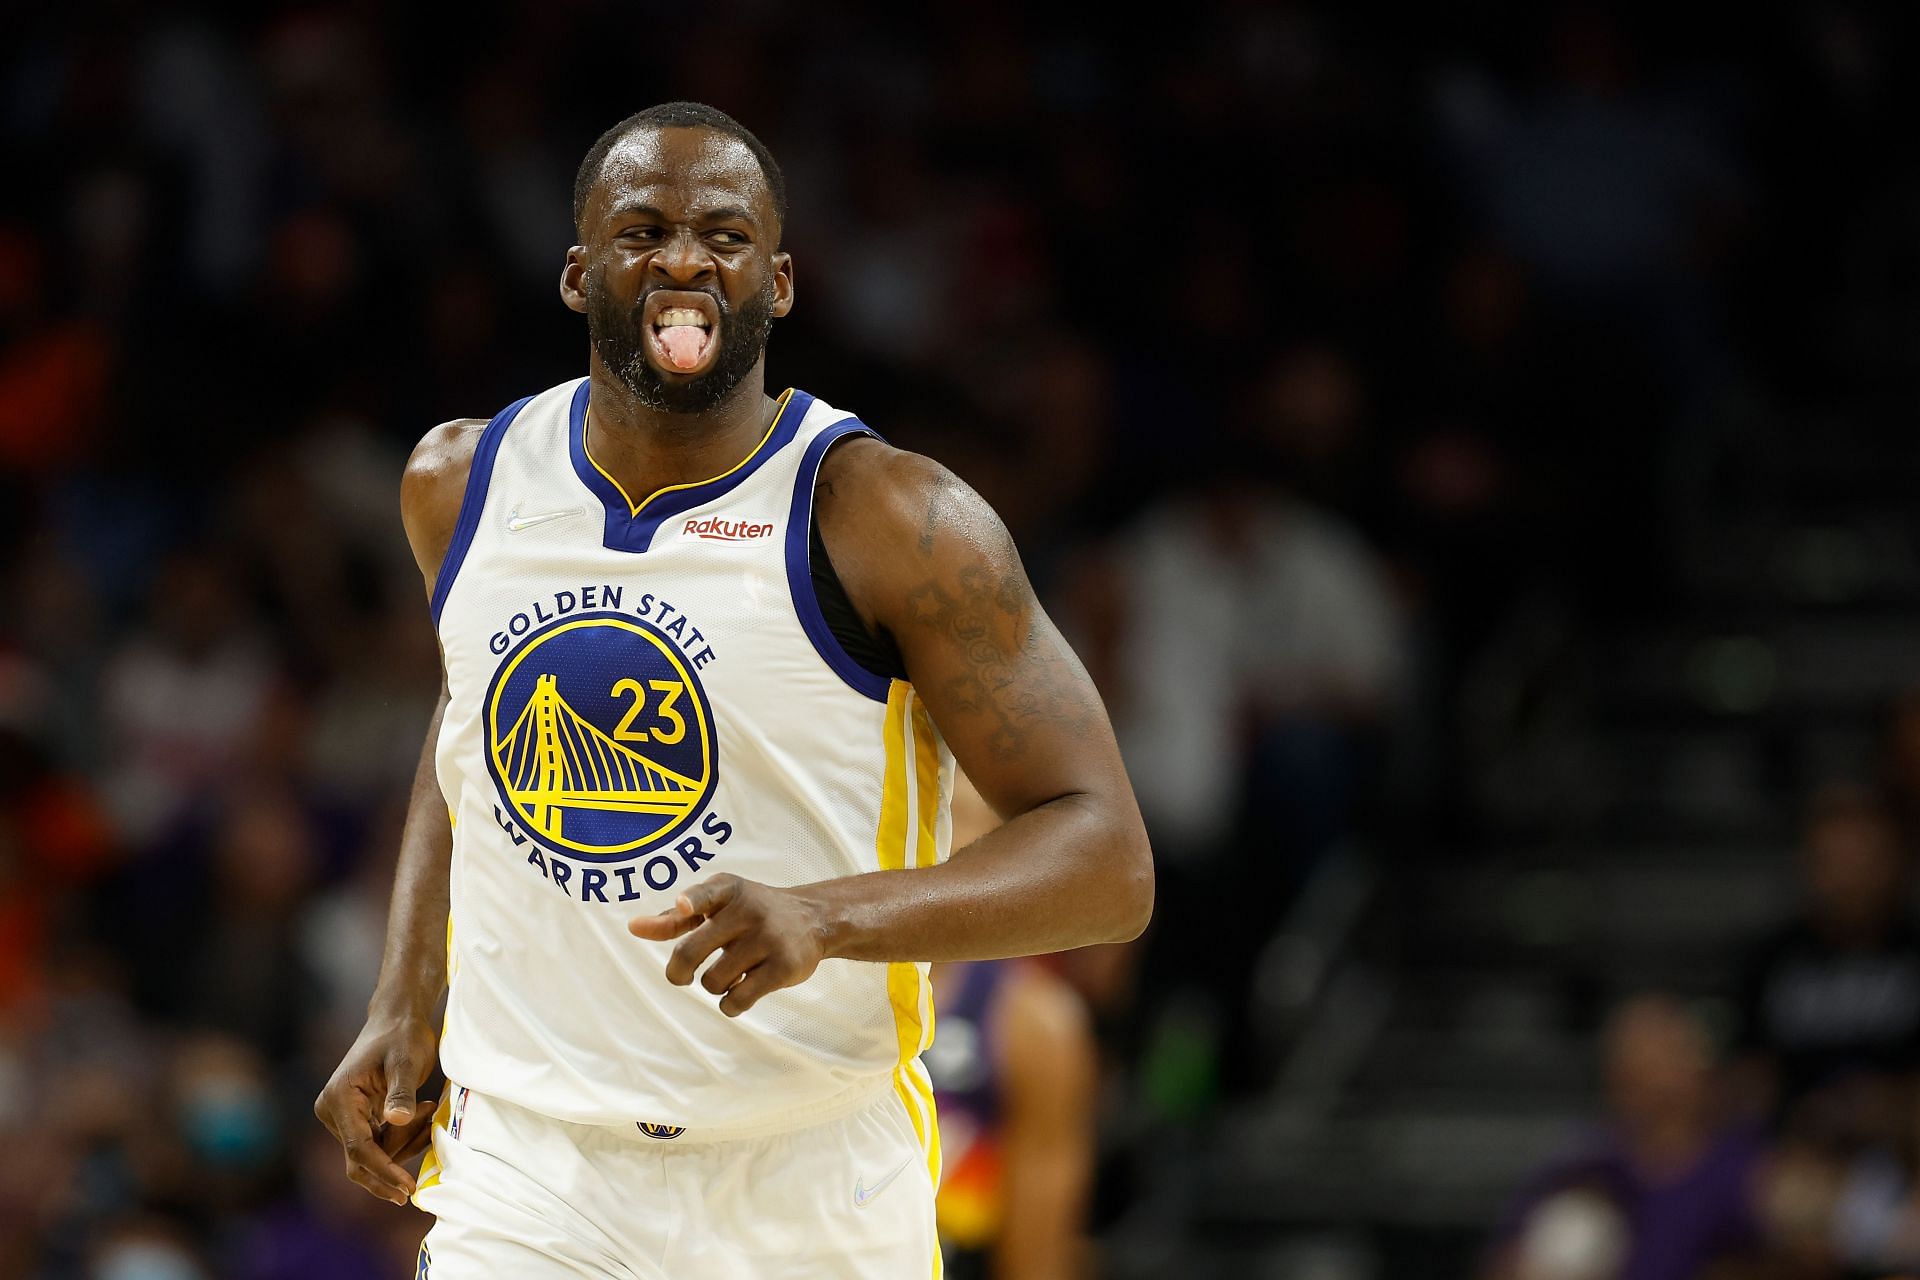 Draymond Green is looking to return to action for the Golden State Warriors soon